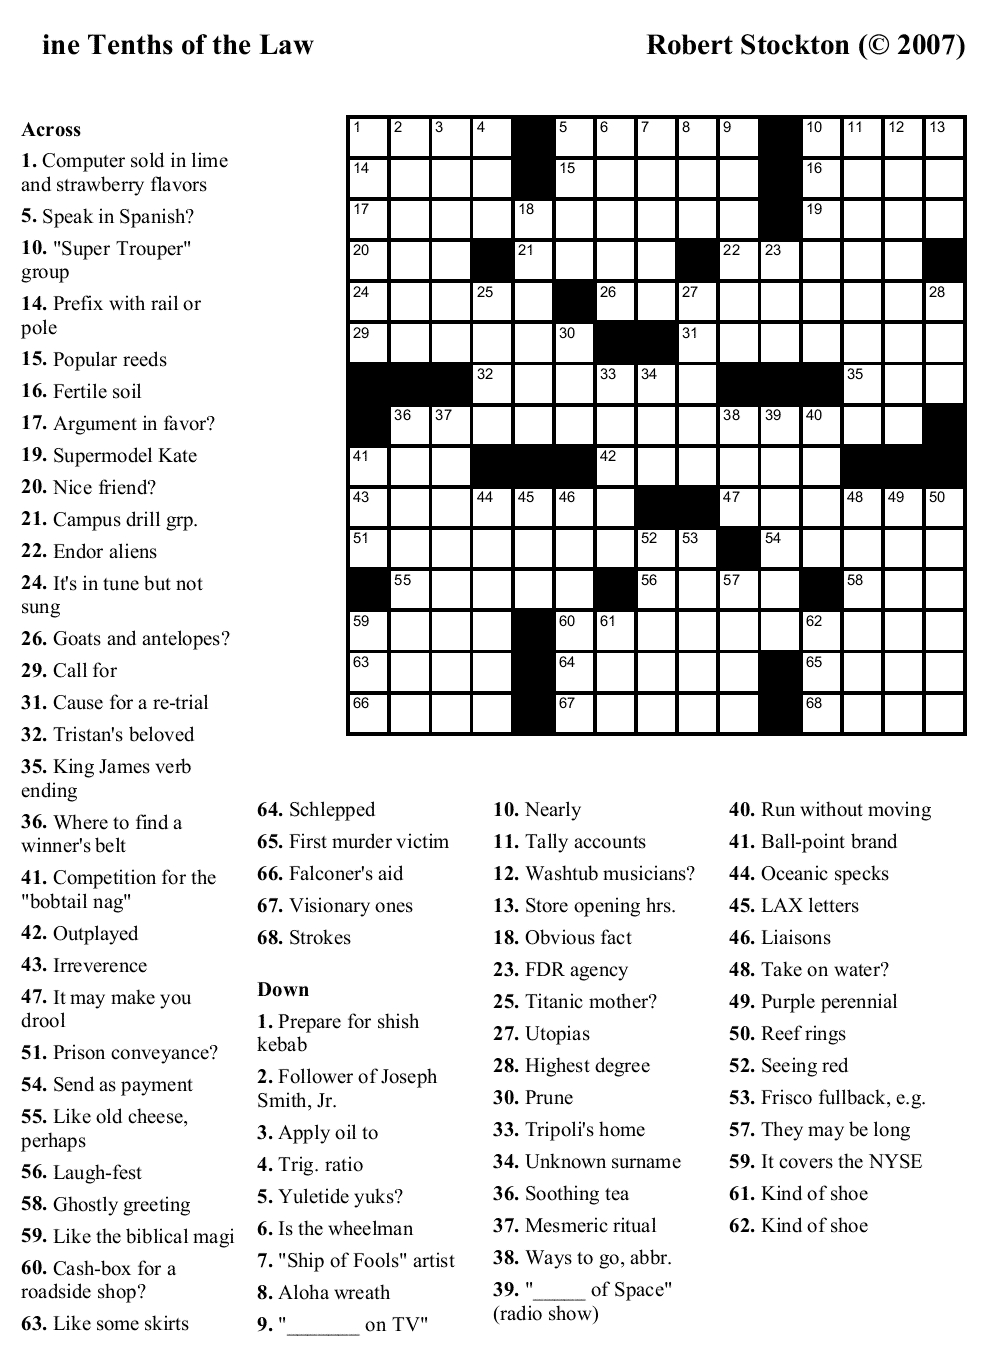 Crossword Puzzles Printable - Yahoo Image Search Results | Crossword - Picture Crossword Puzzles Printable